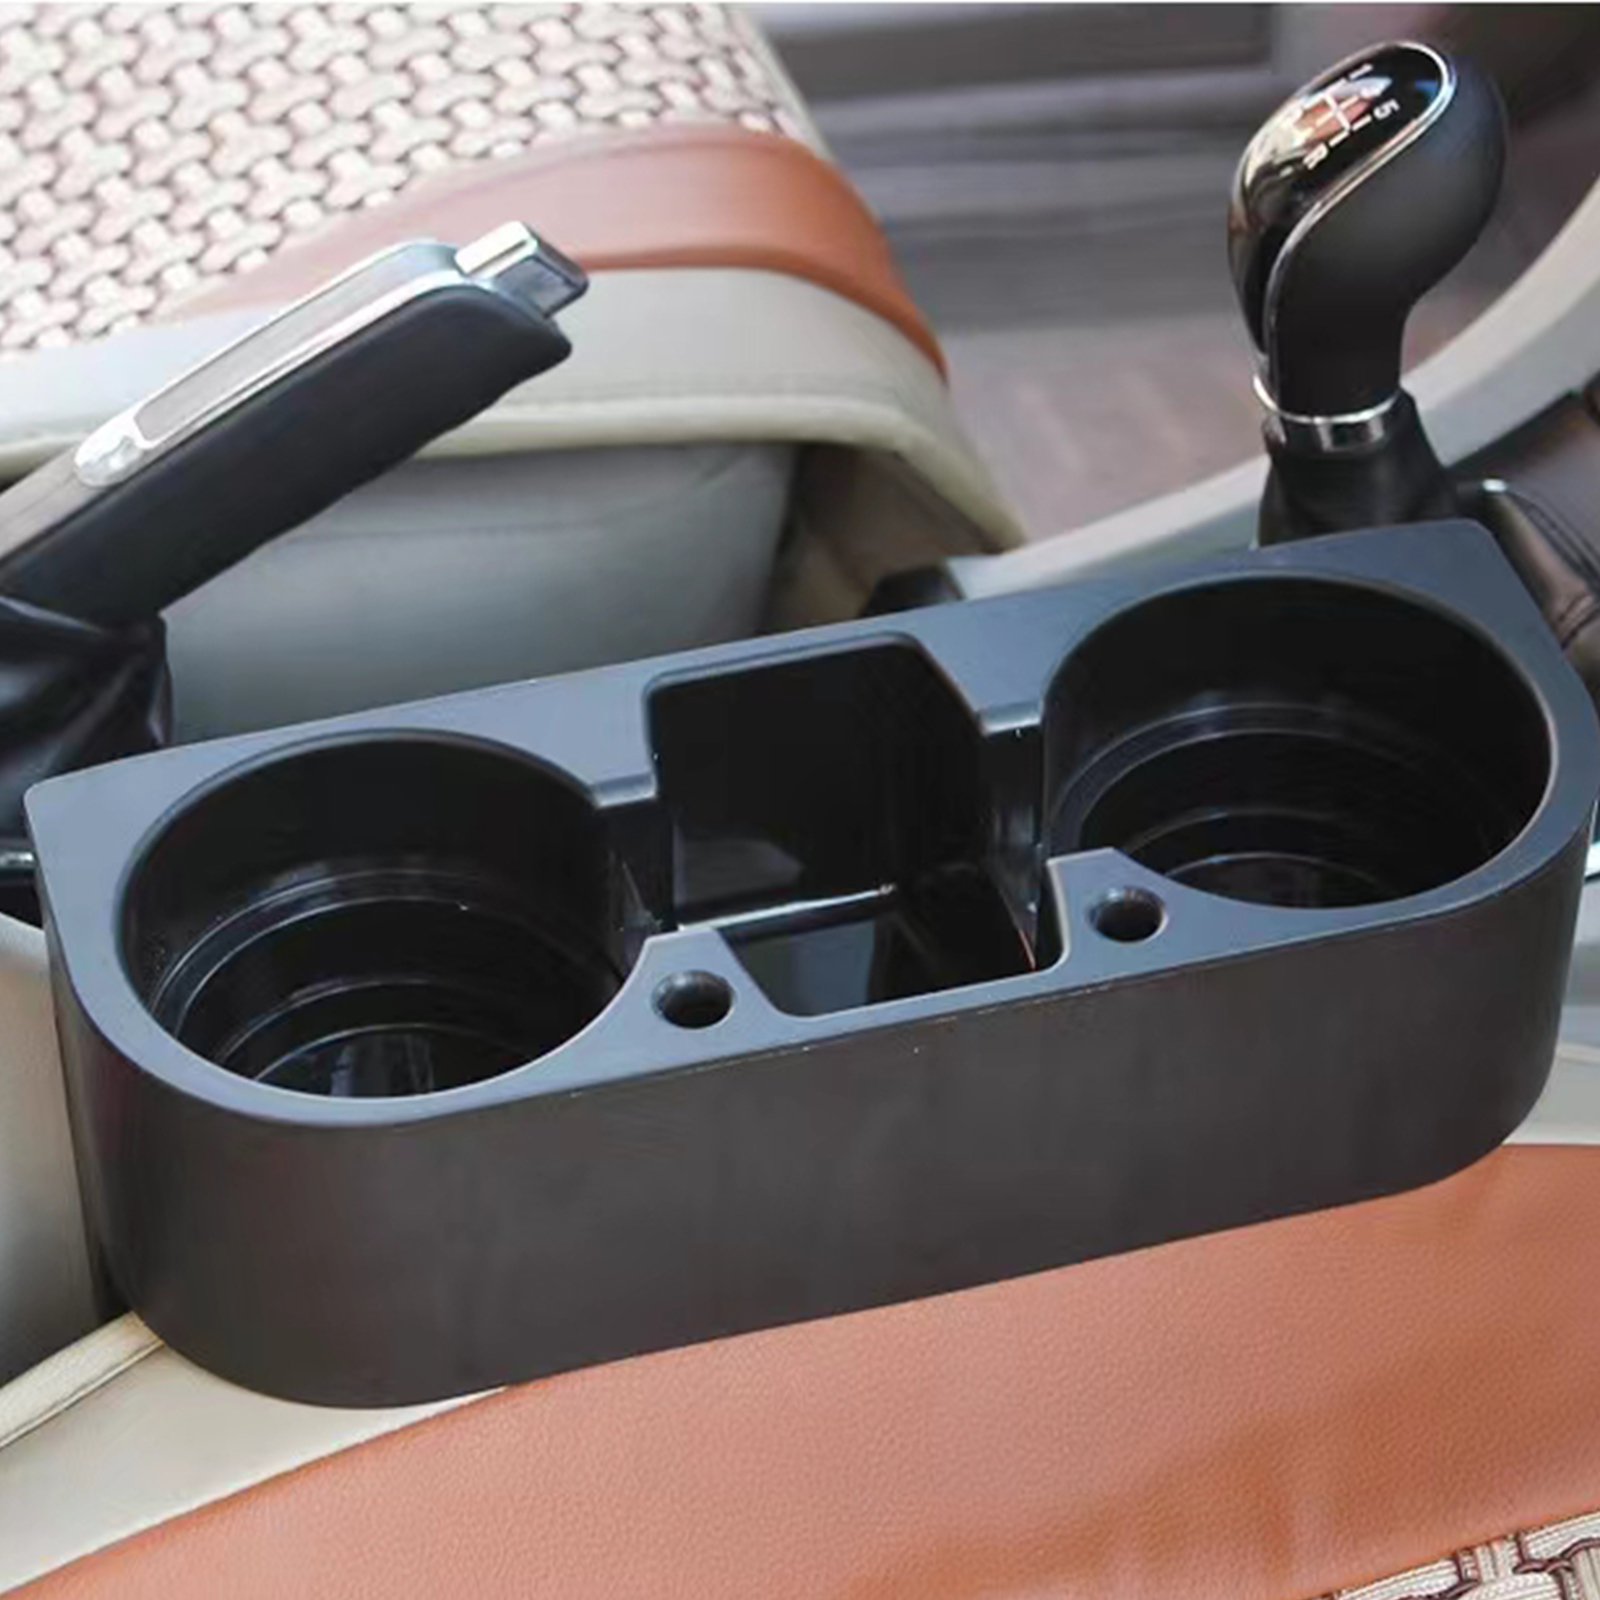 Leather Car Cup Holder: Add Stylish Storage to Your Vehicle with This  Slotted Black Car Seat Box